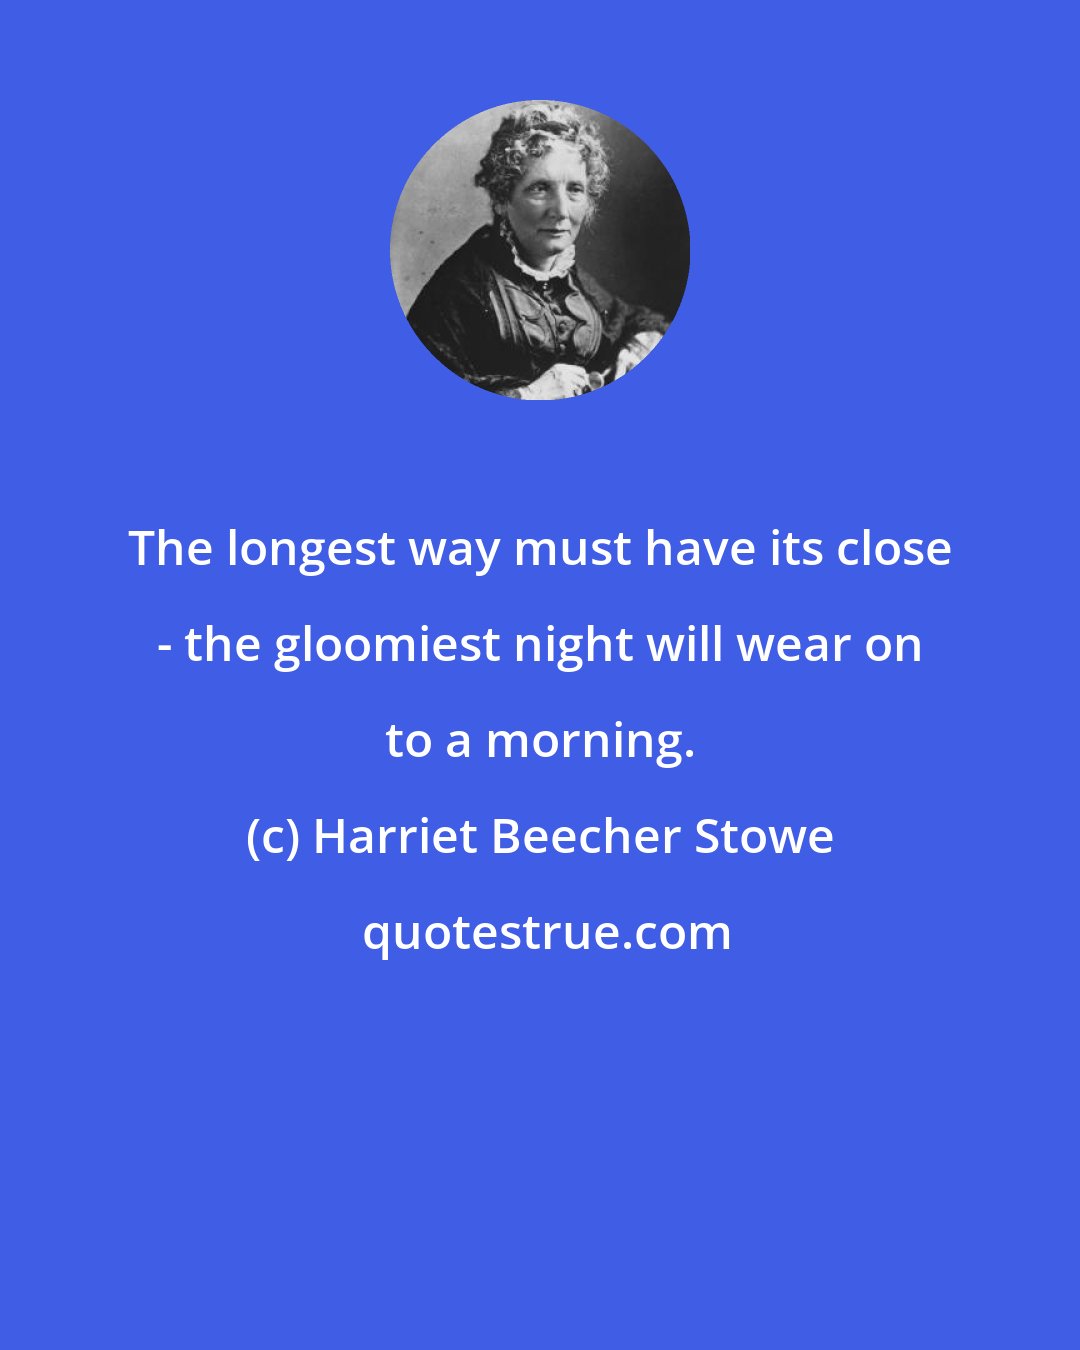 Harriet Beecher Stowe: The longest way must have its close - the gloomiest night will wear on to a morning.